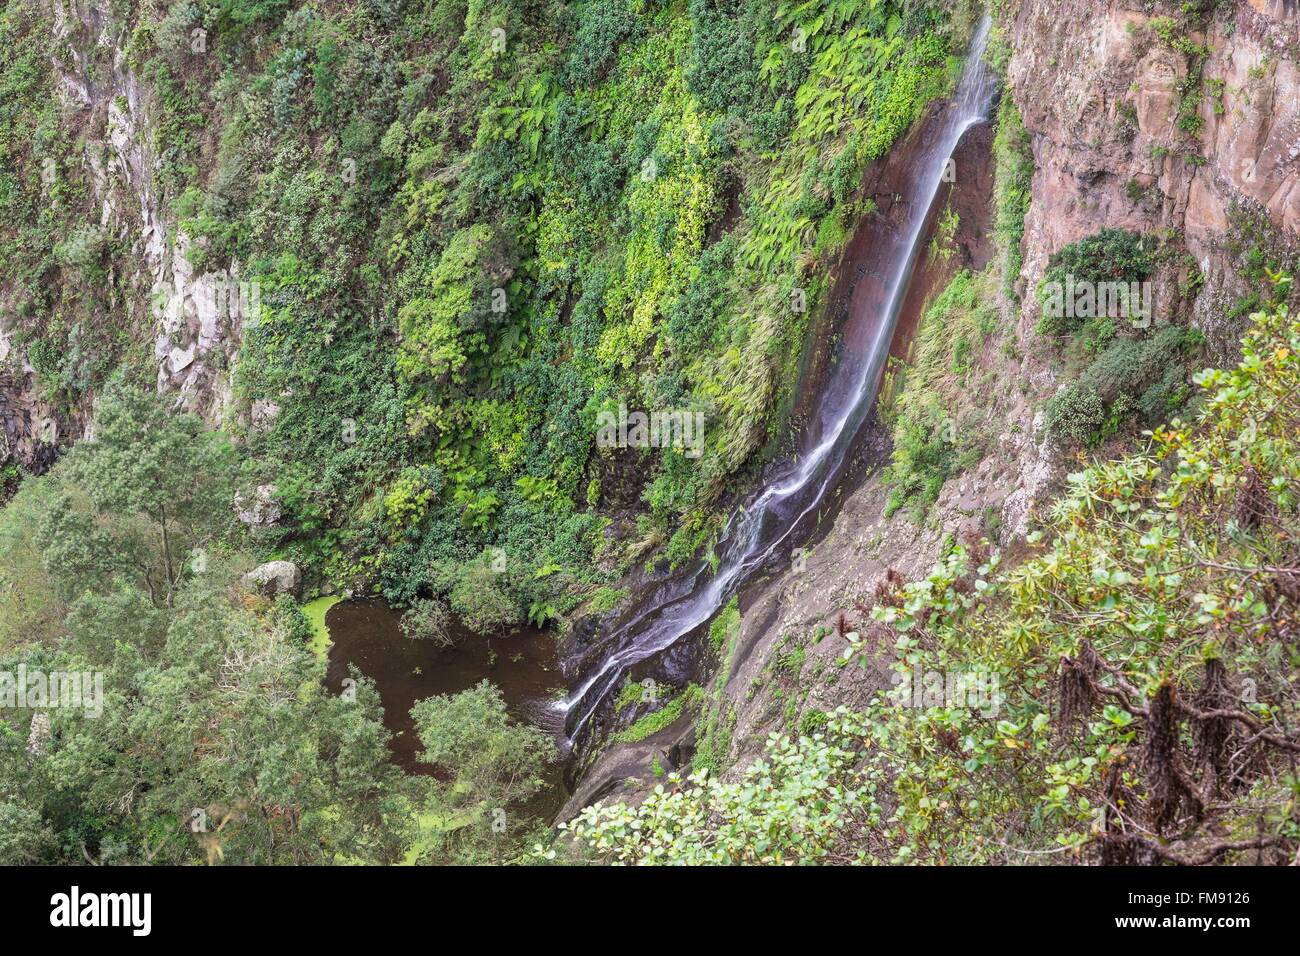 Spain, Canary Islands, La Gomera island declared a Biosphere Reserve by UNESCO, Garajonay National Park (Unesco World Heritage), El Cedro waterfall, a natural 150 metre high waterfall which supplies the farming valley of Hermigua Stock Photo